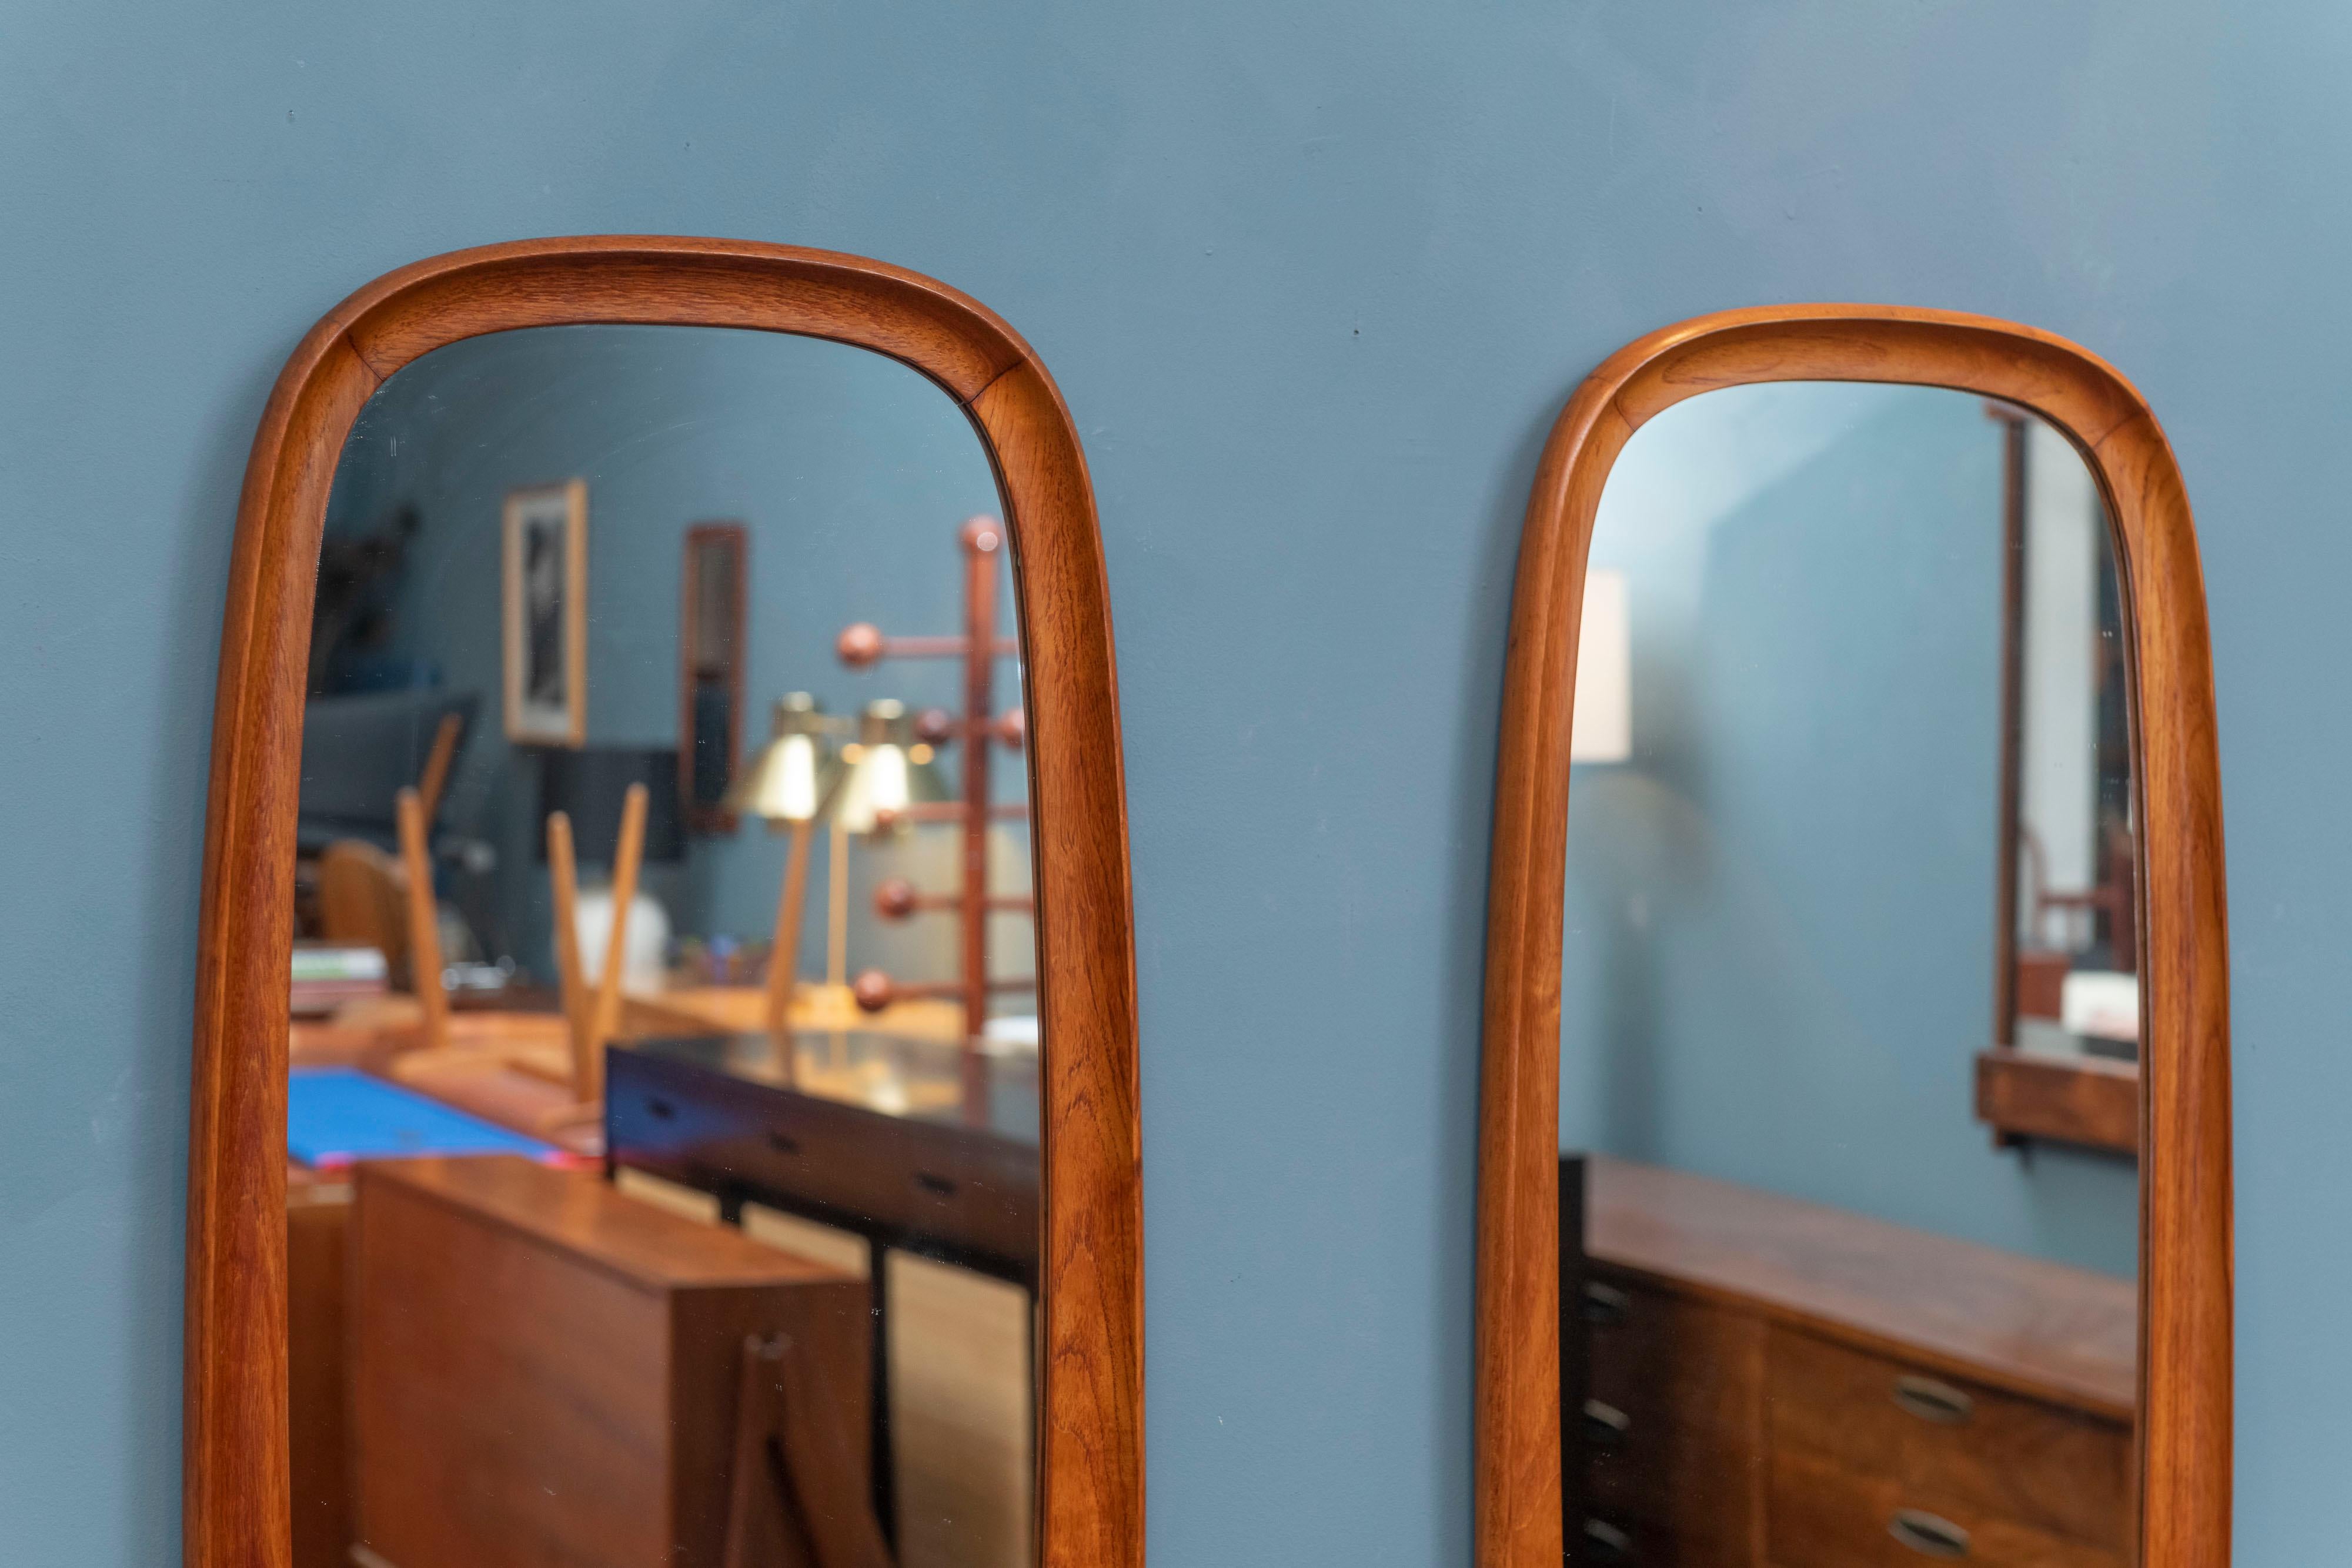 Pair of Scandinavian Modern teak wall mirrors, Denmark. Interesting sculpted oval form mirrors that are rare to find in pairs, ready to be enjoyed.